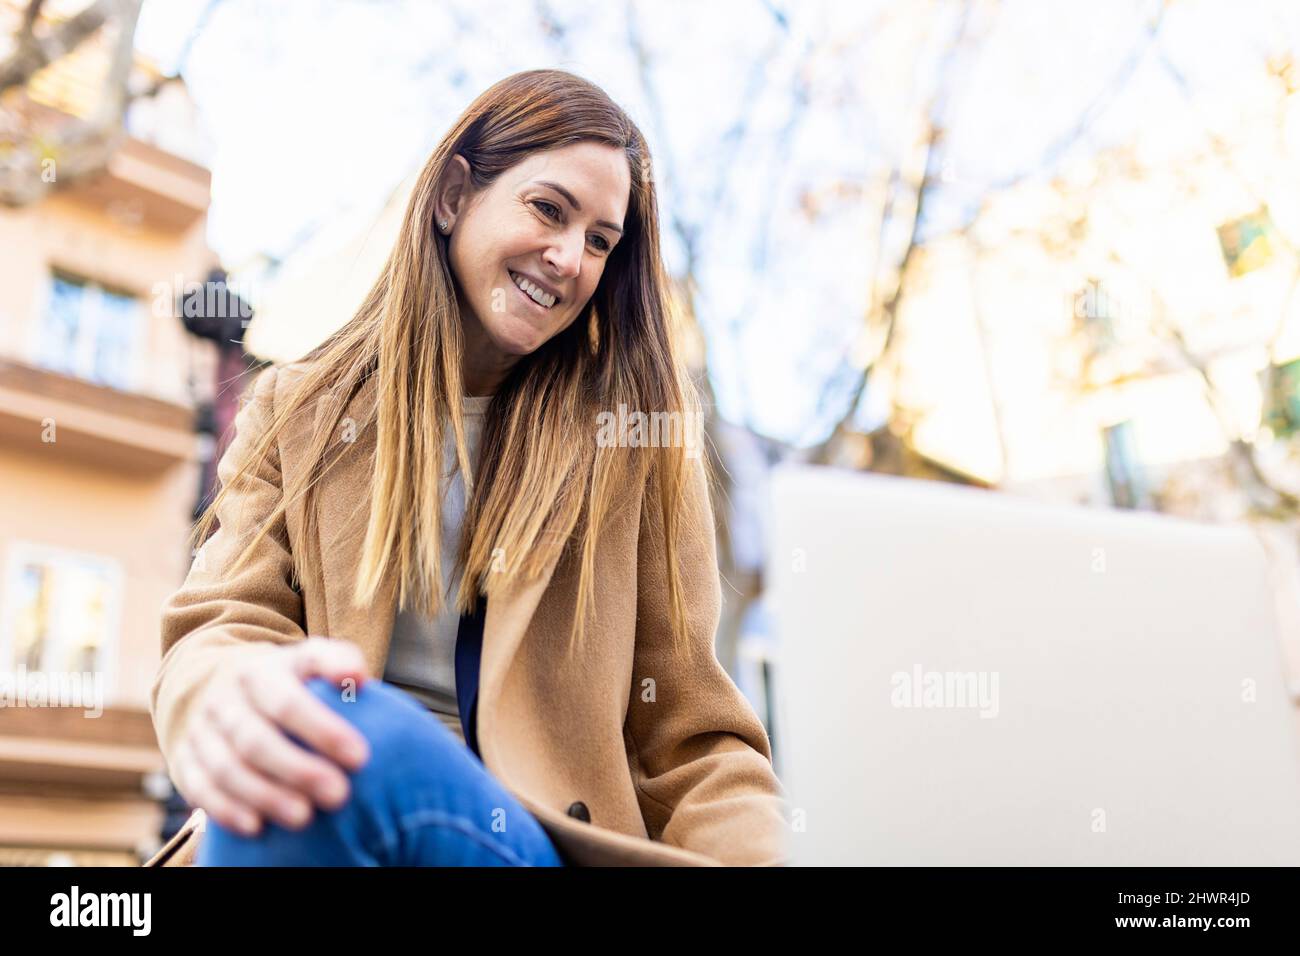 Smiling woman with brown hair looking at laptop in city Stock Photo